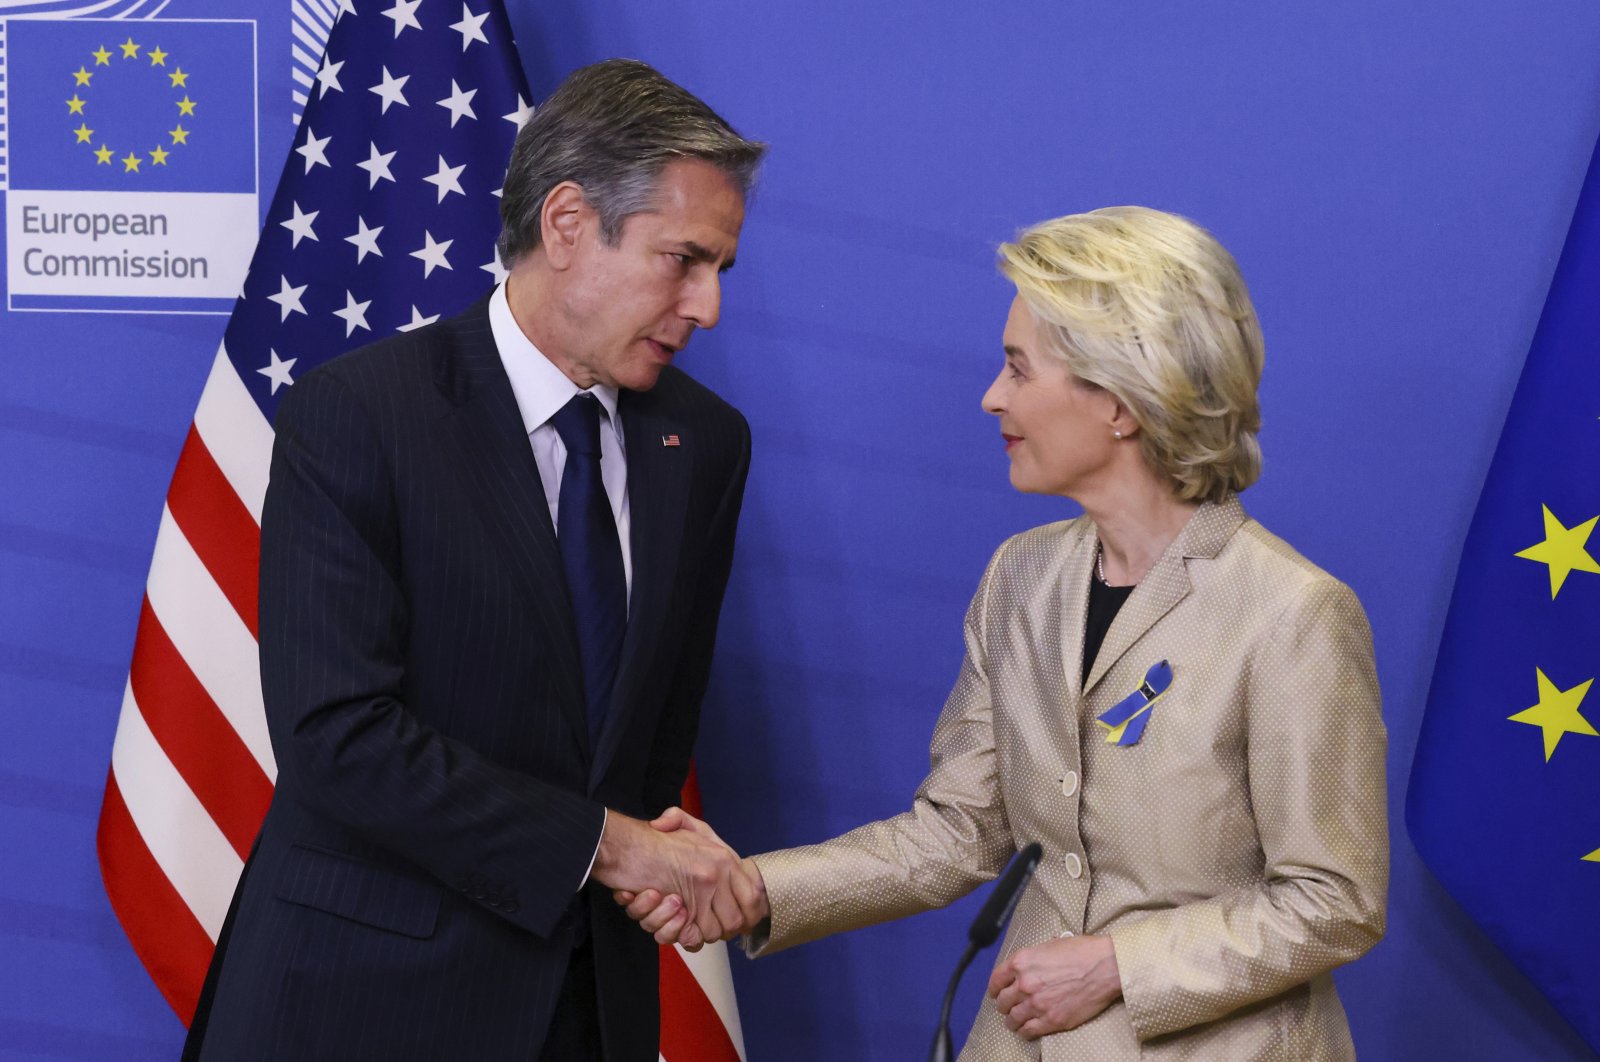 U.S. Secretary of State Antony Blinken (L) shakes hands with European Commission President Ursula von der Leyen prior to a meeting at EU headquarters in Brussels, March 4, 2022. (AP Photo)